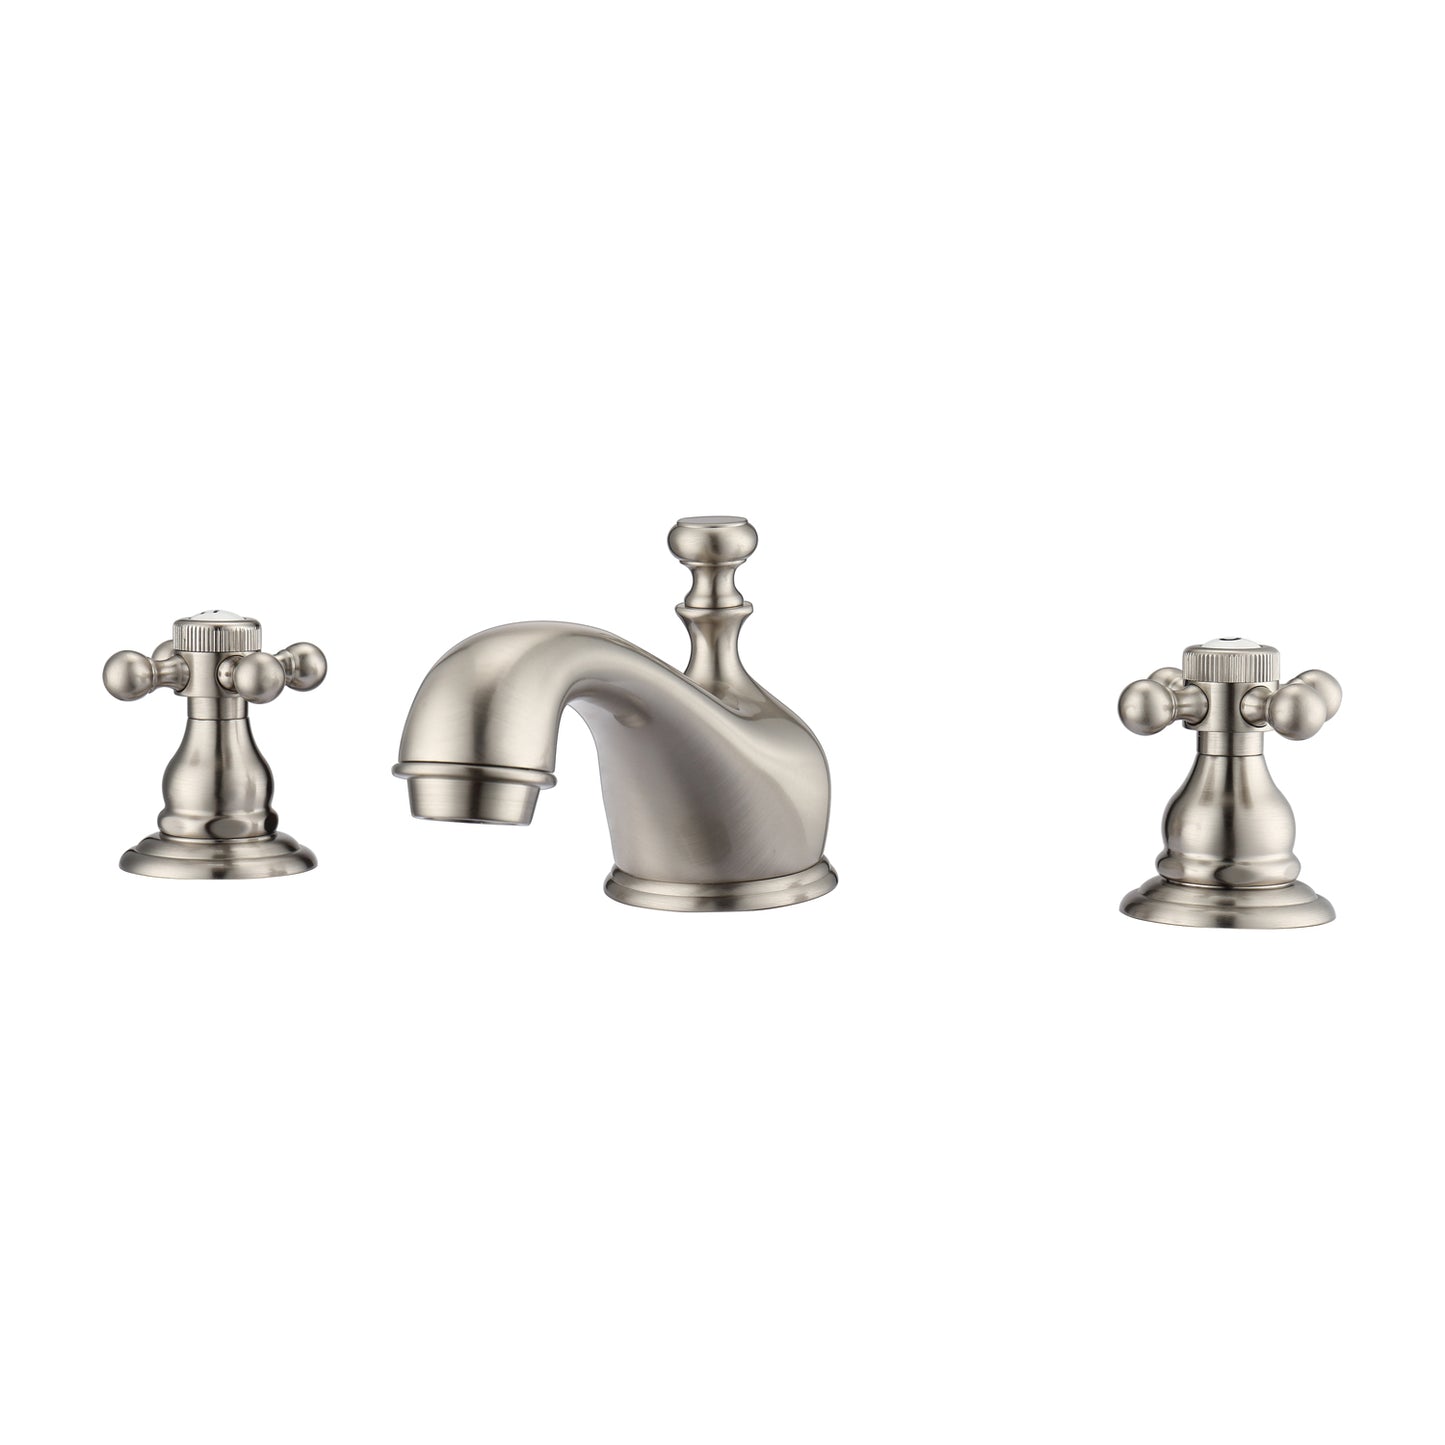 Marsala 8" Widespread Brushed Nickel Bathroom Faucet with Button Cross Handles